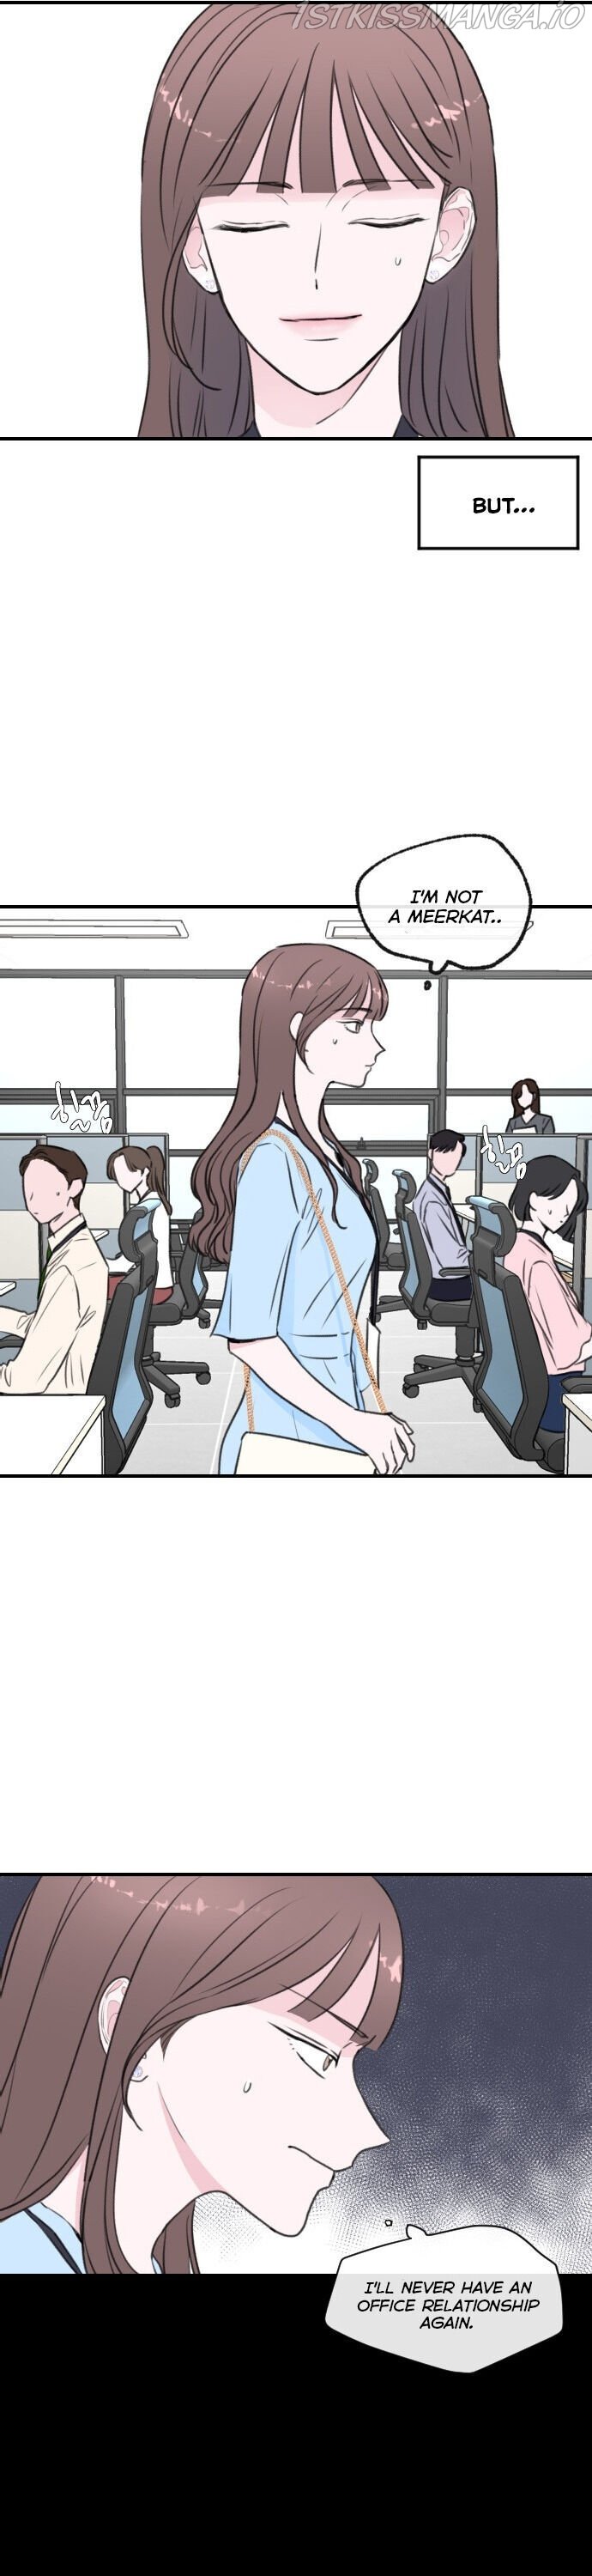 Office Marriage, After a Breakup chapter 3